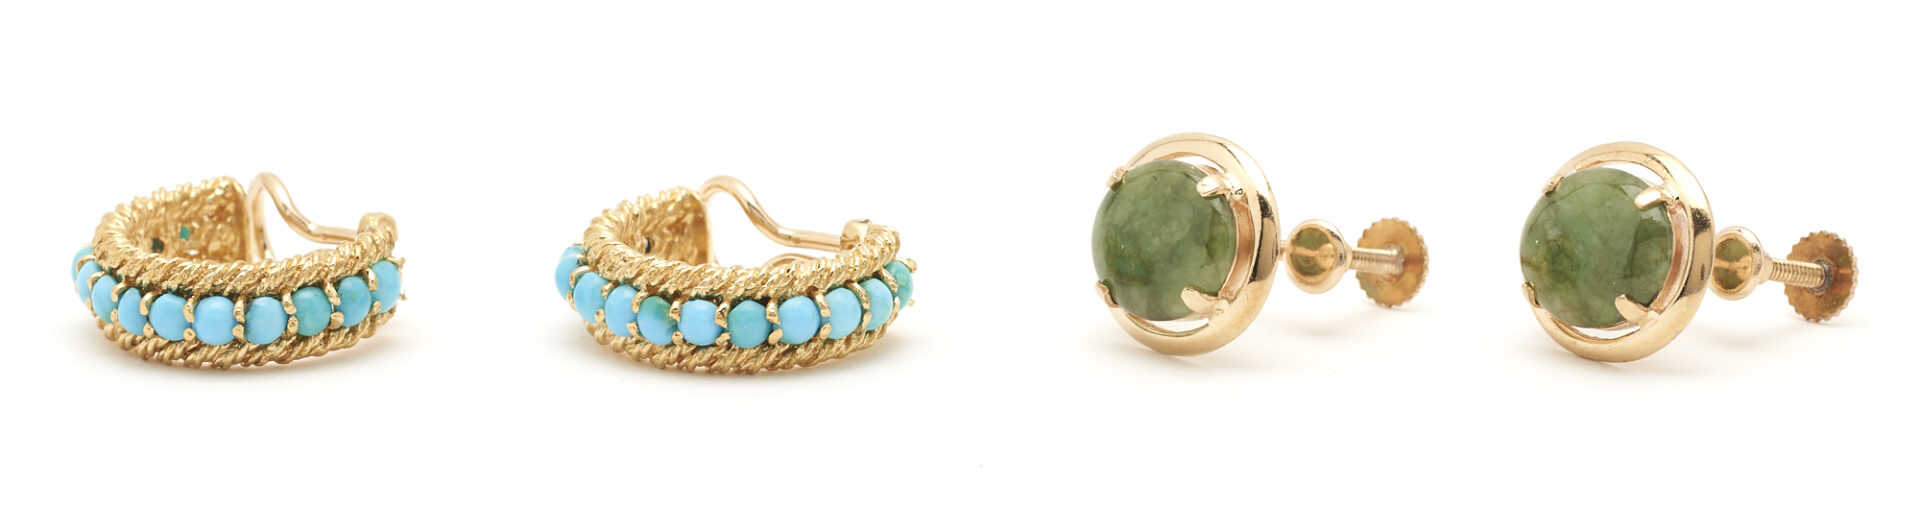 Lot 414: 2 Prs. Ladies' Gold Earrings with Jade, Turquoise